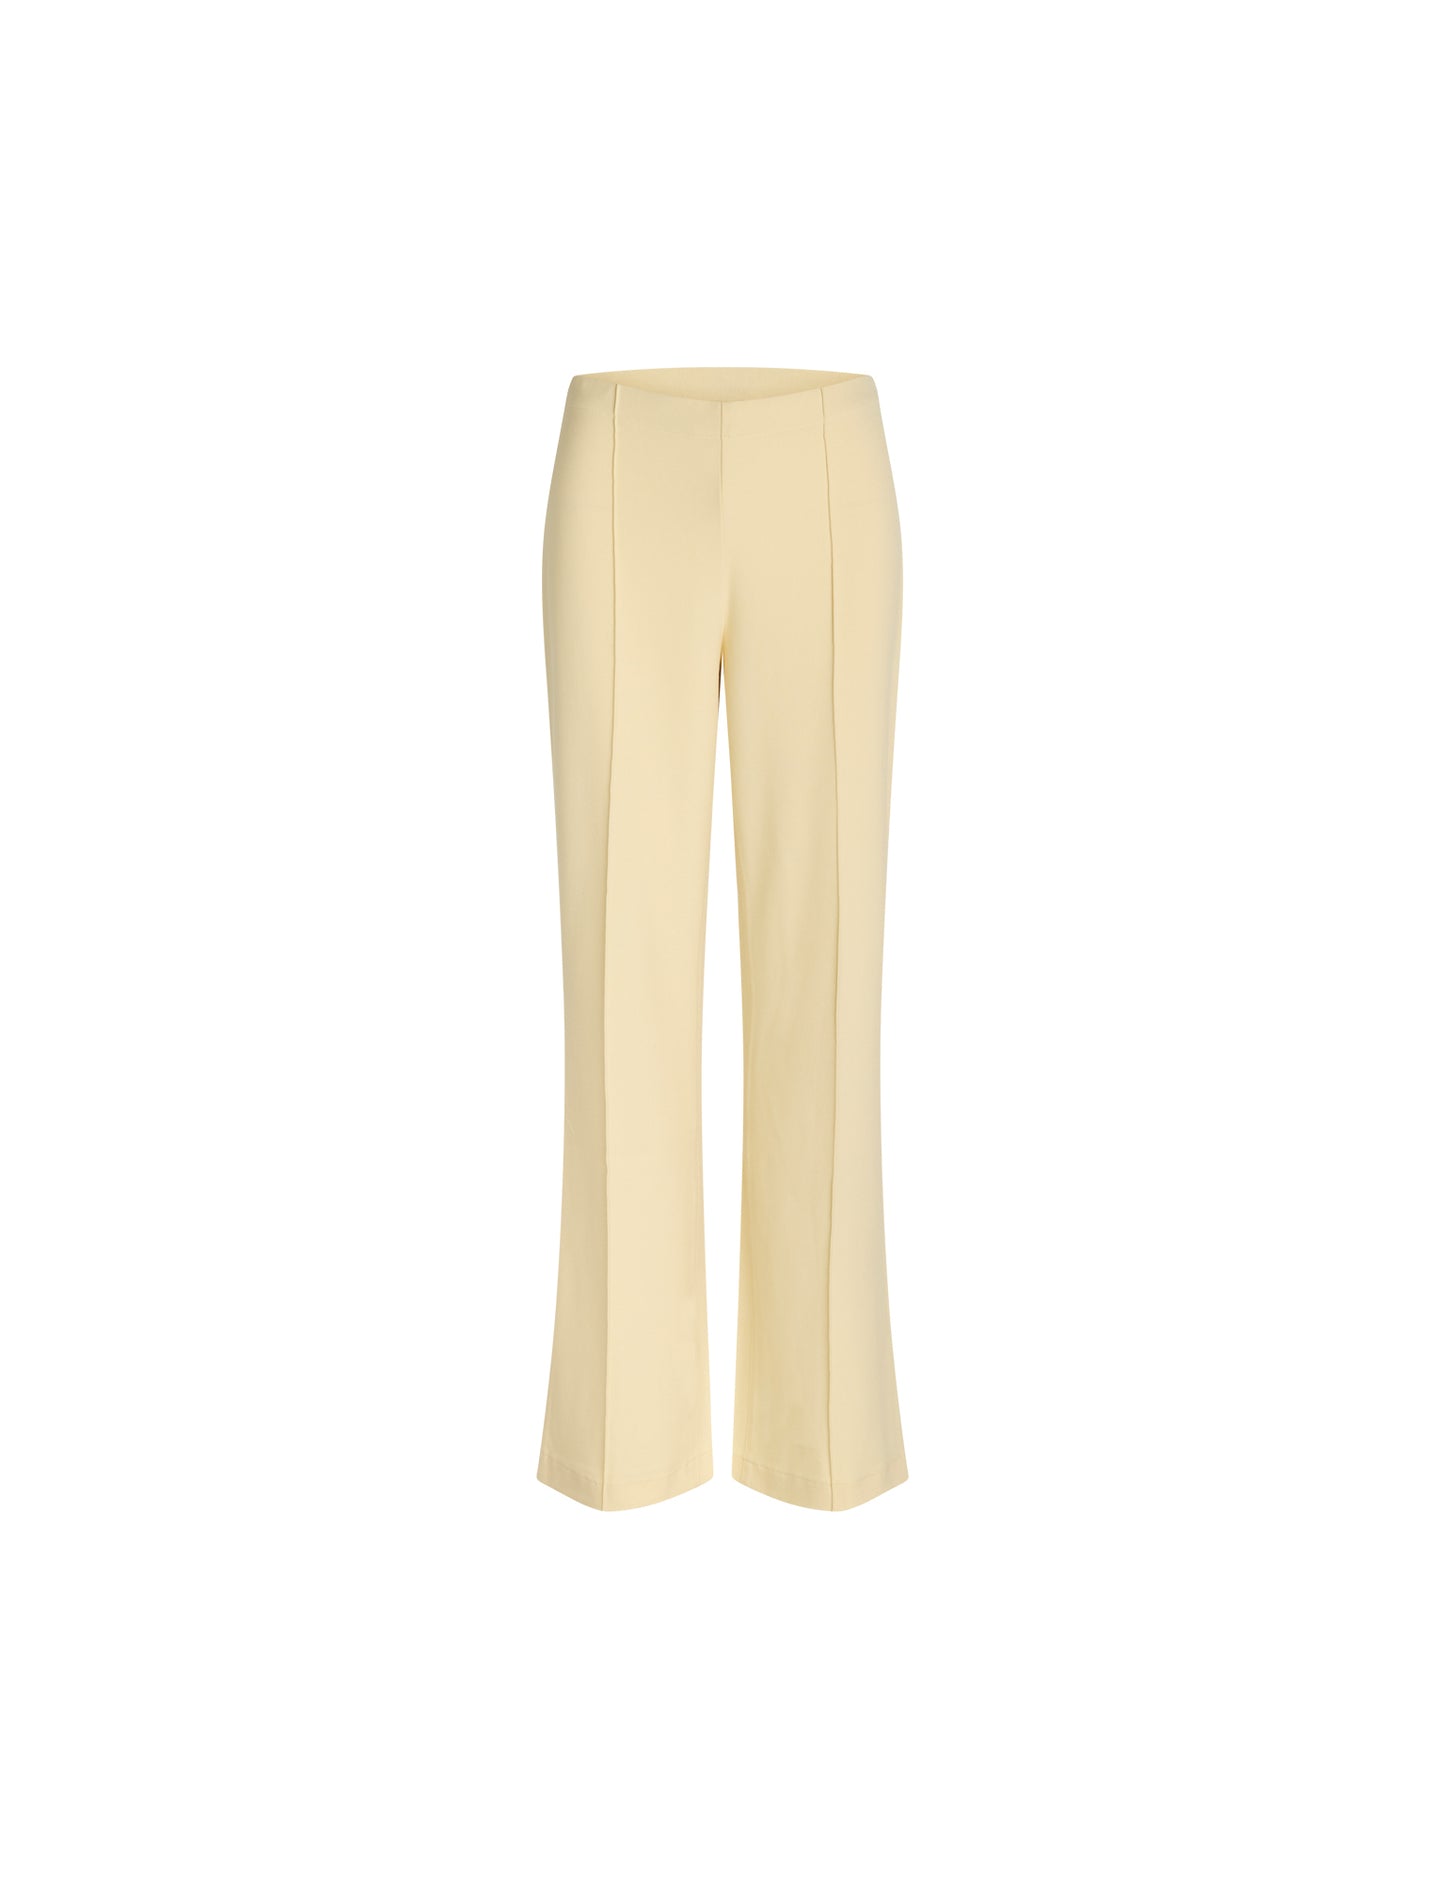 Mads Nørgaard Recycled Sportina Pirla Pants Double Cream